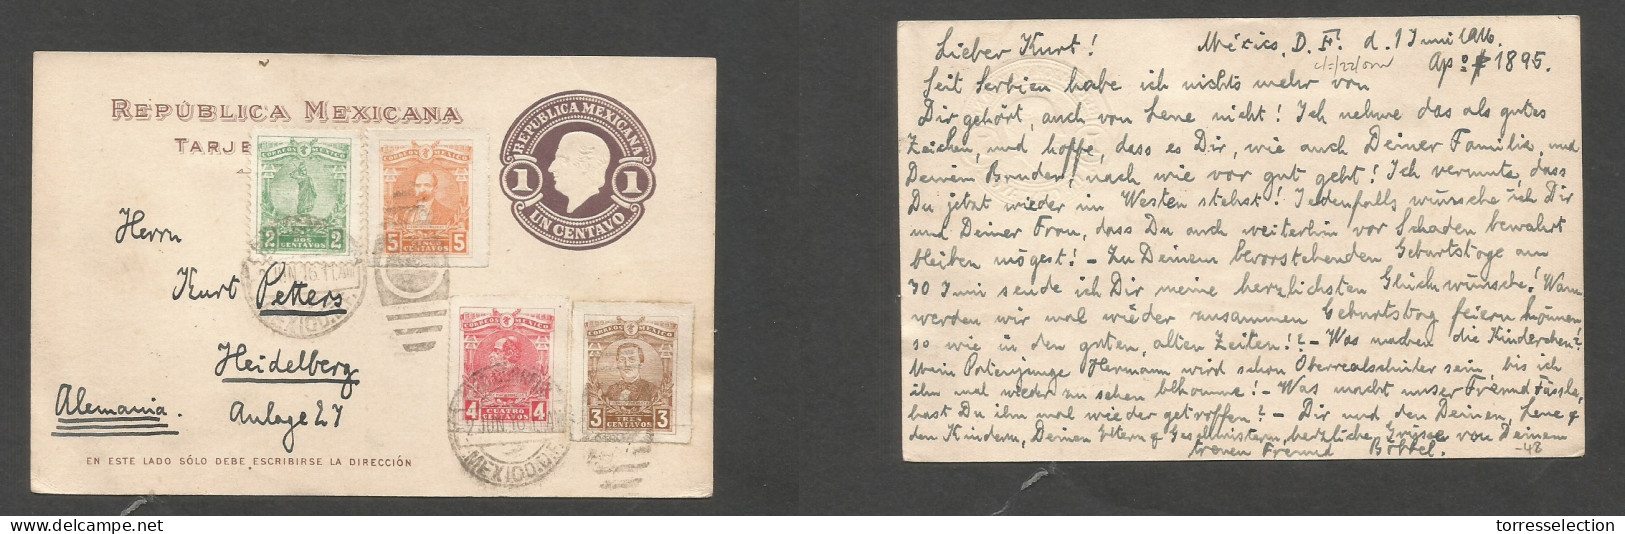 MEXICO - Stationery. 1916 (1-2 June) DF - Germany, Heidelberg 1c Lilac + 4 Diff Adtl, Stat Card, Cds Grill. Fine. Some S - Mexico